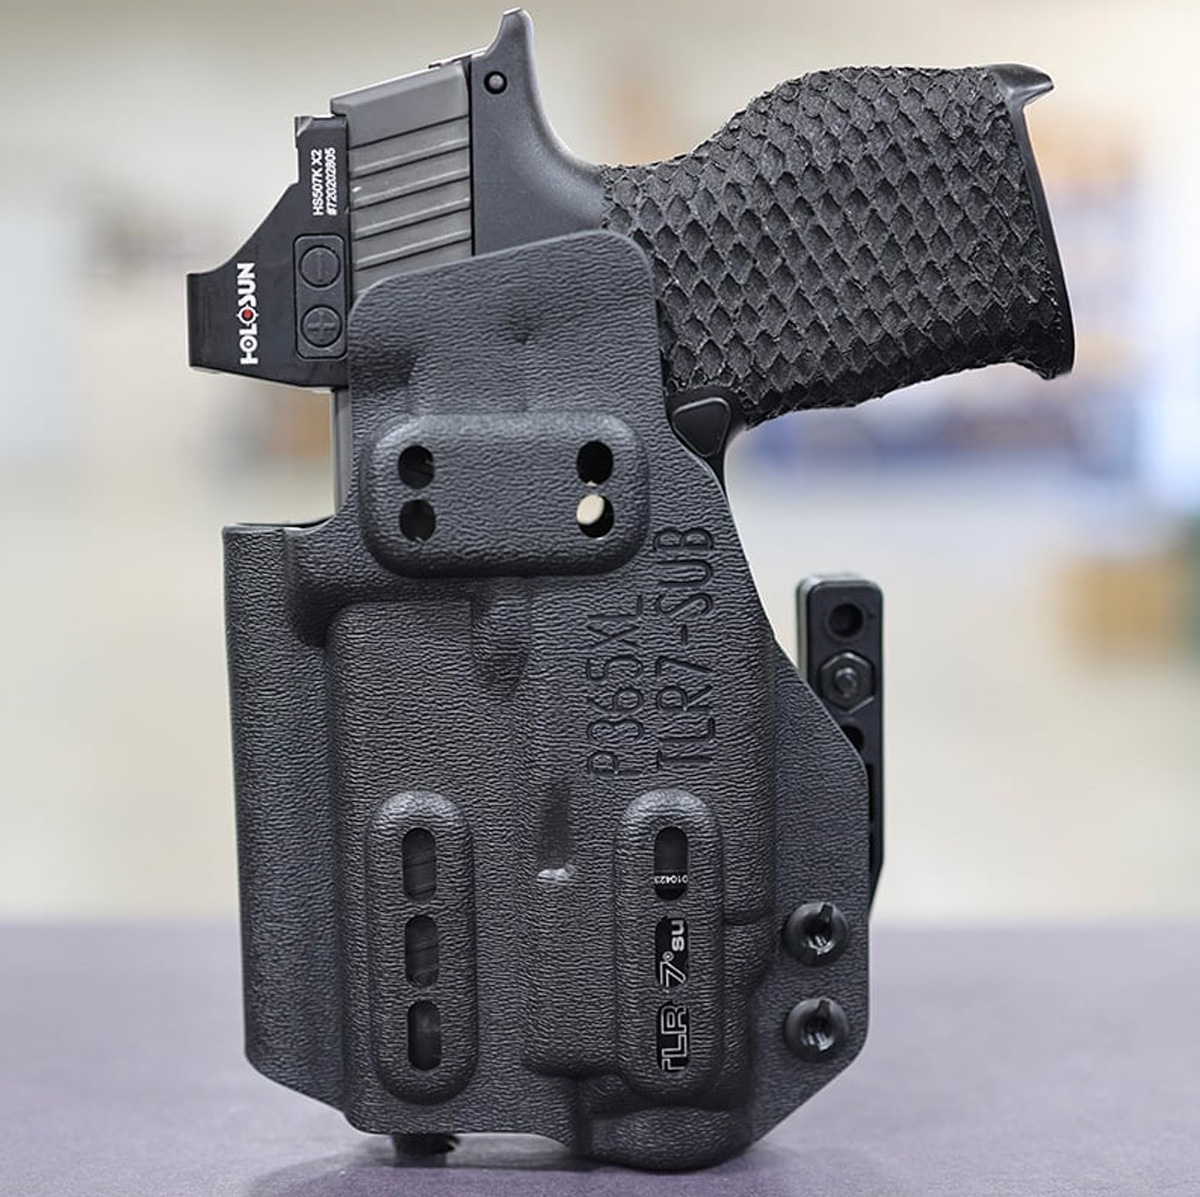 Ember - AIWB/IWB Light bearing holster for sub-compact concealed carry